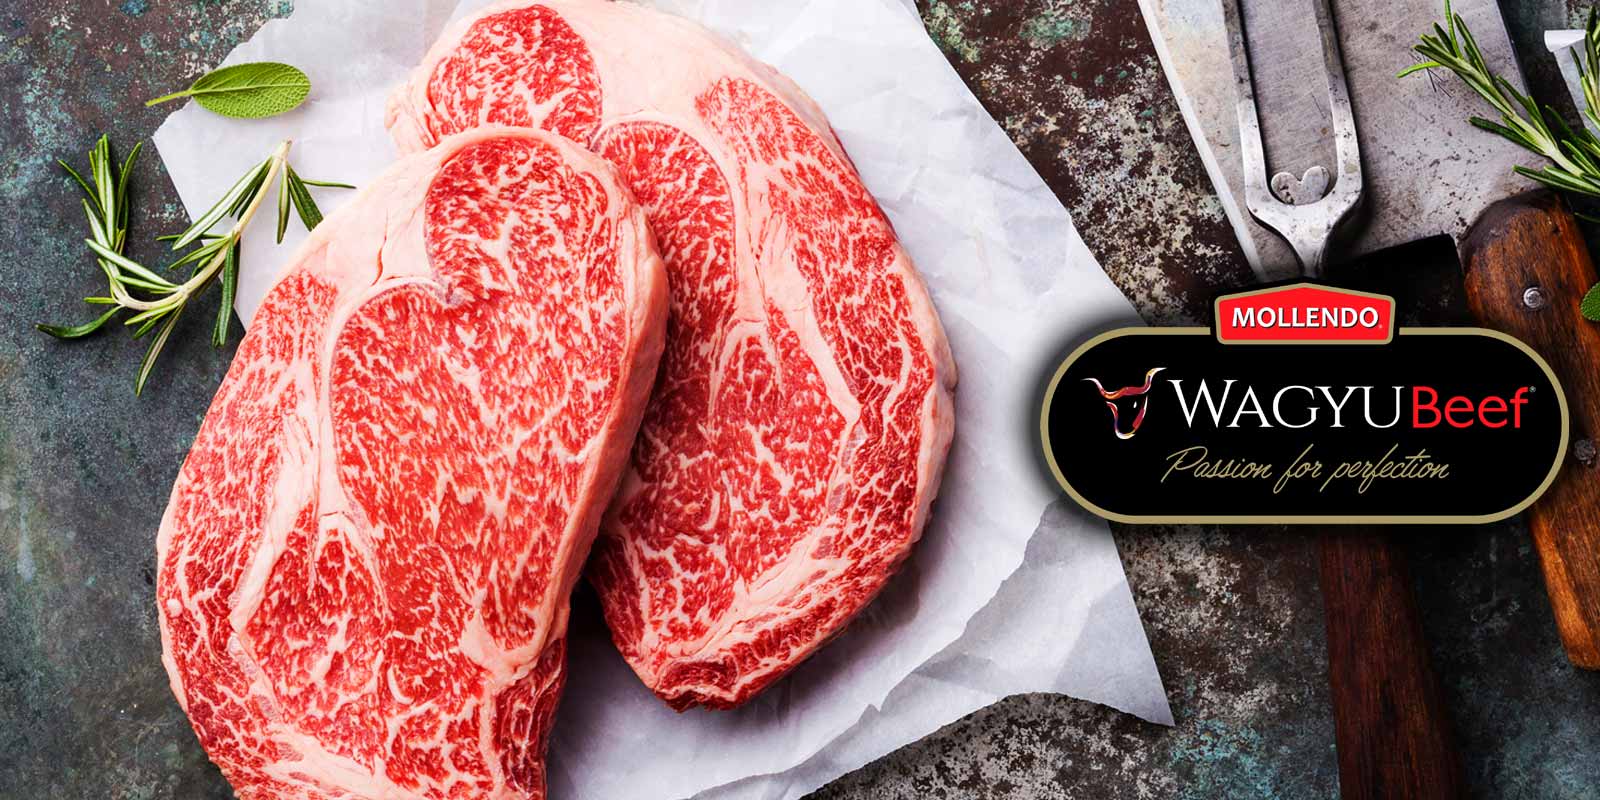 Wagyu beef, meat from Mollendo from Chile Agrícola Mollendo is the largest producer of Wagyu Beef in Chile and excels in beef production and production. The quality of Wagyu beef depends on its genetics, its handling and its special diet.